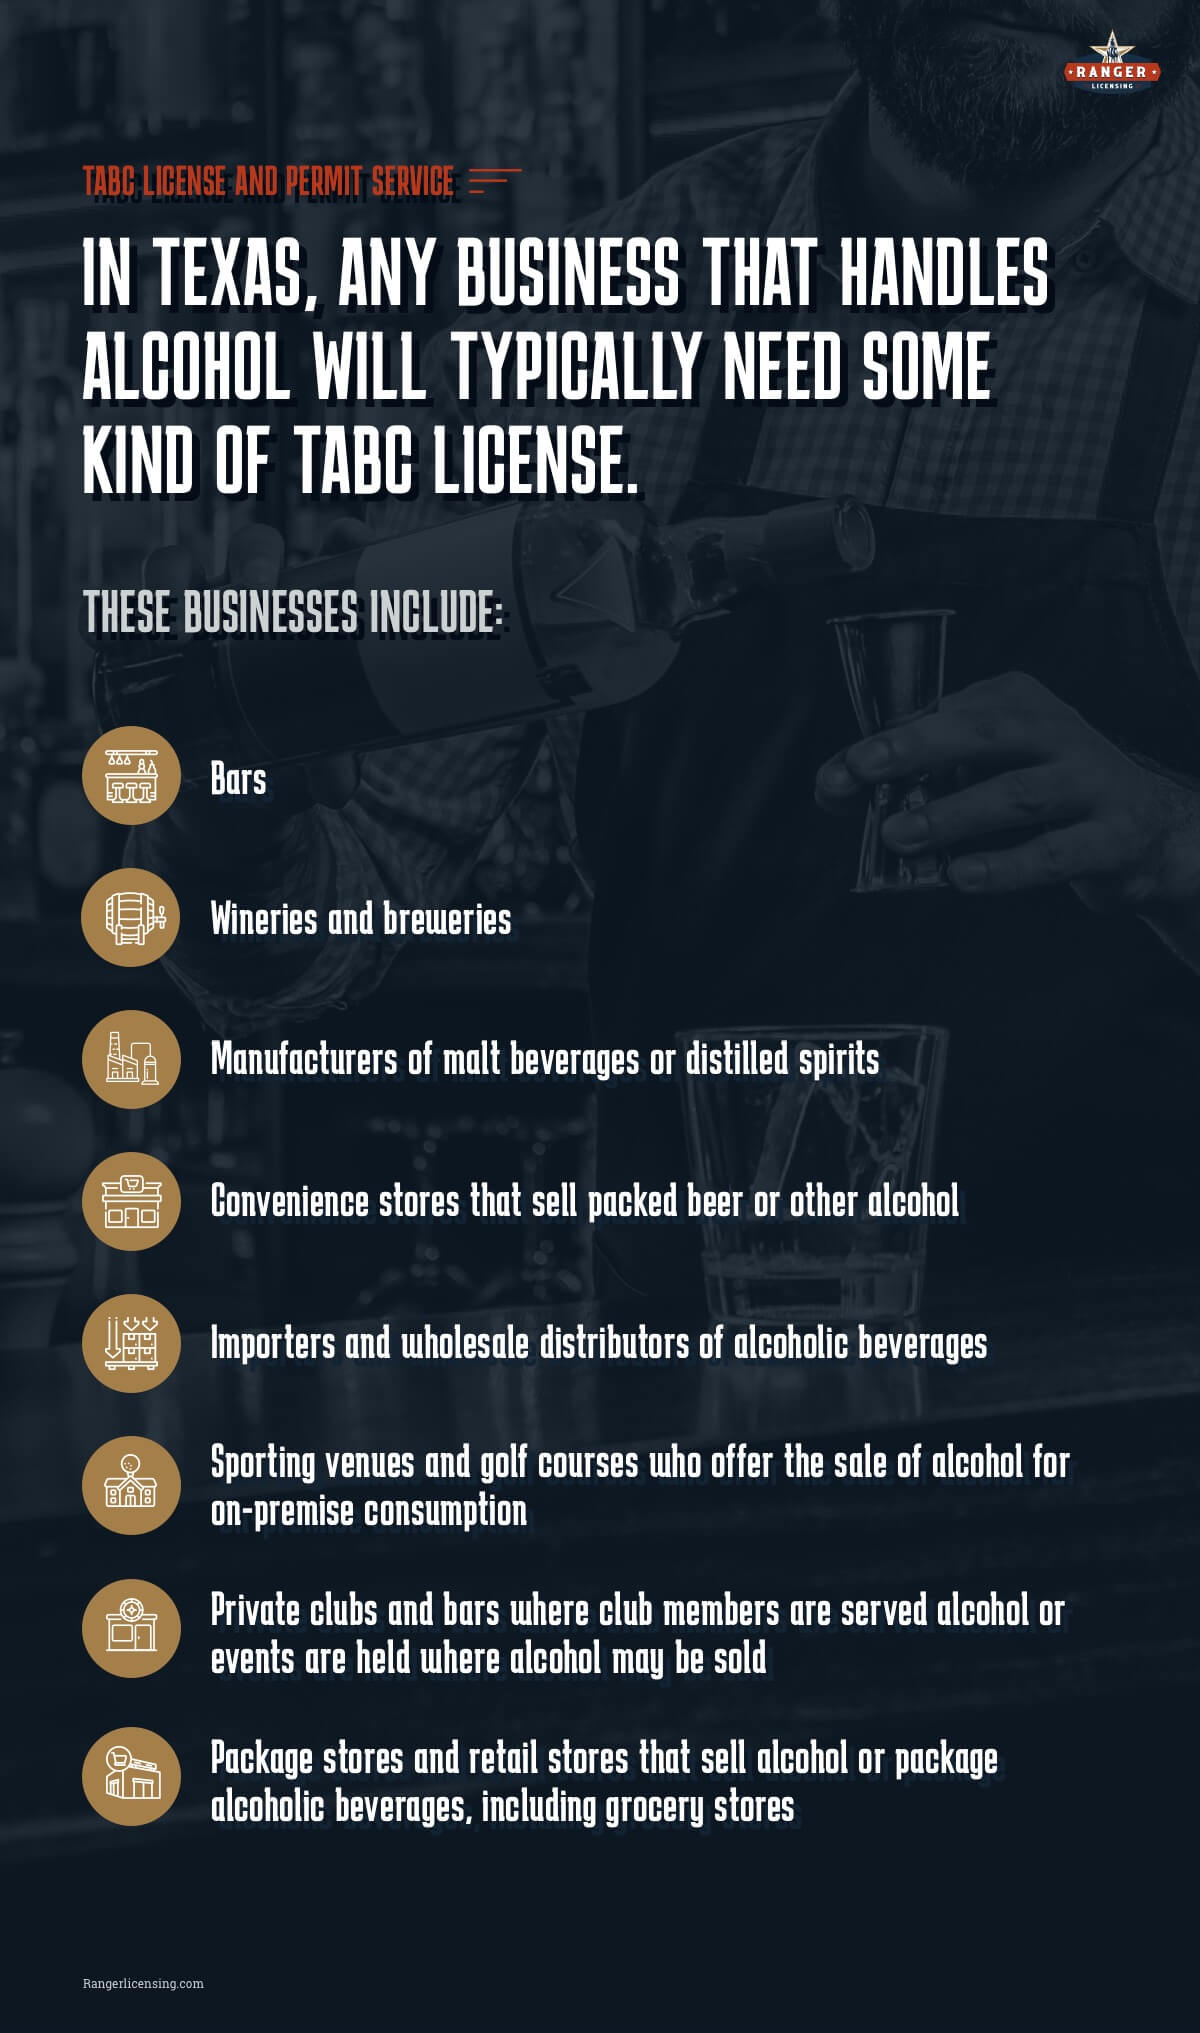 Business that need a TABC License or Permit